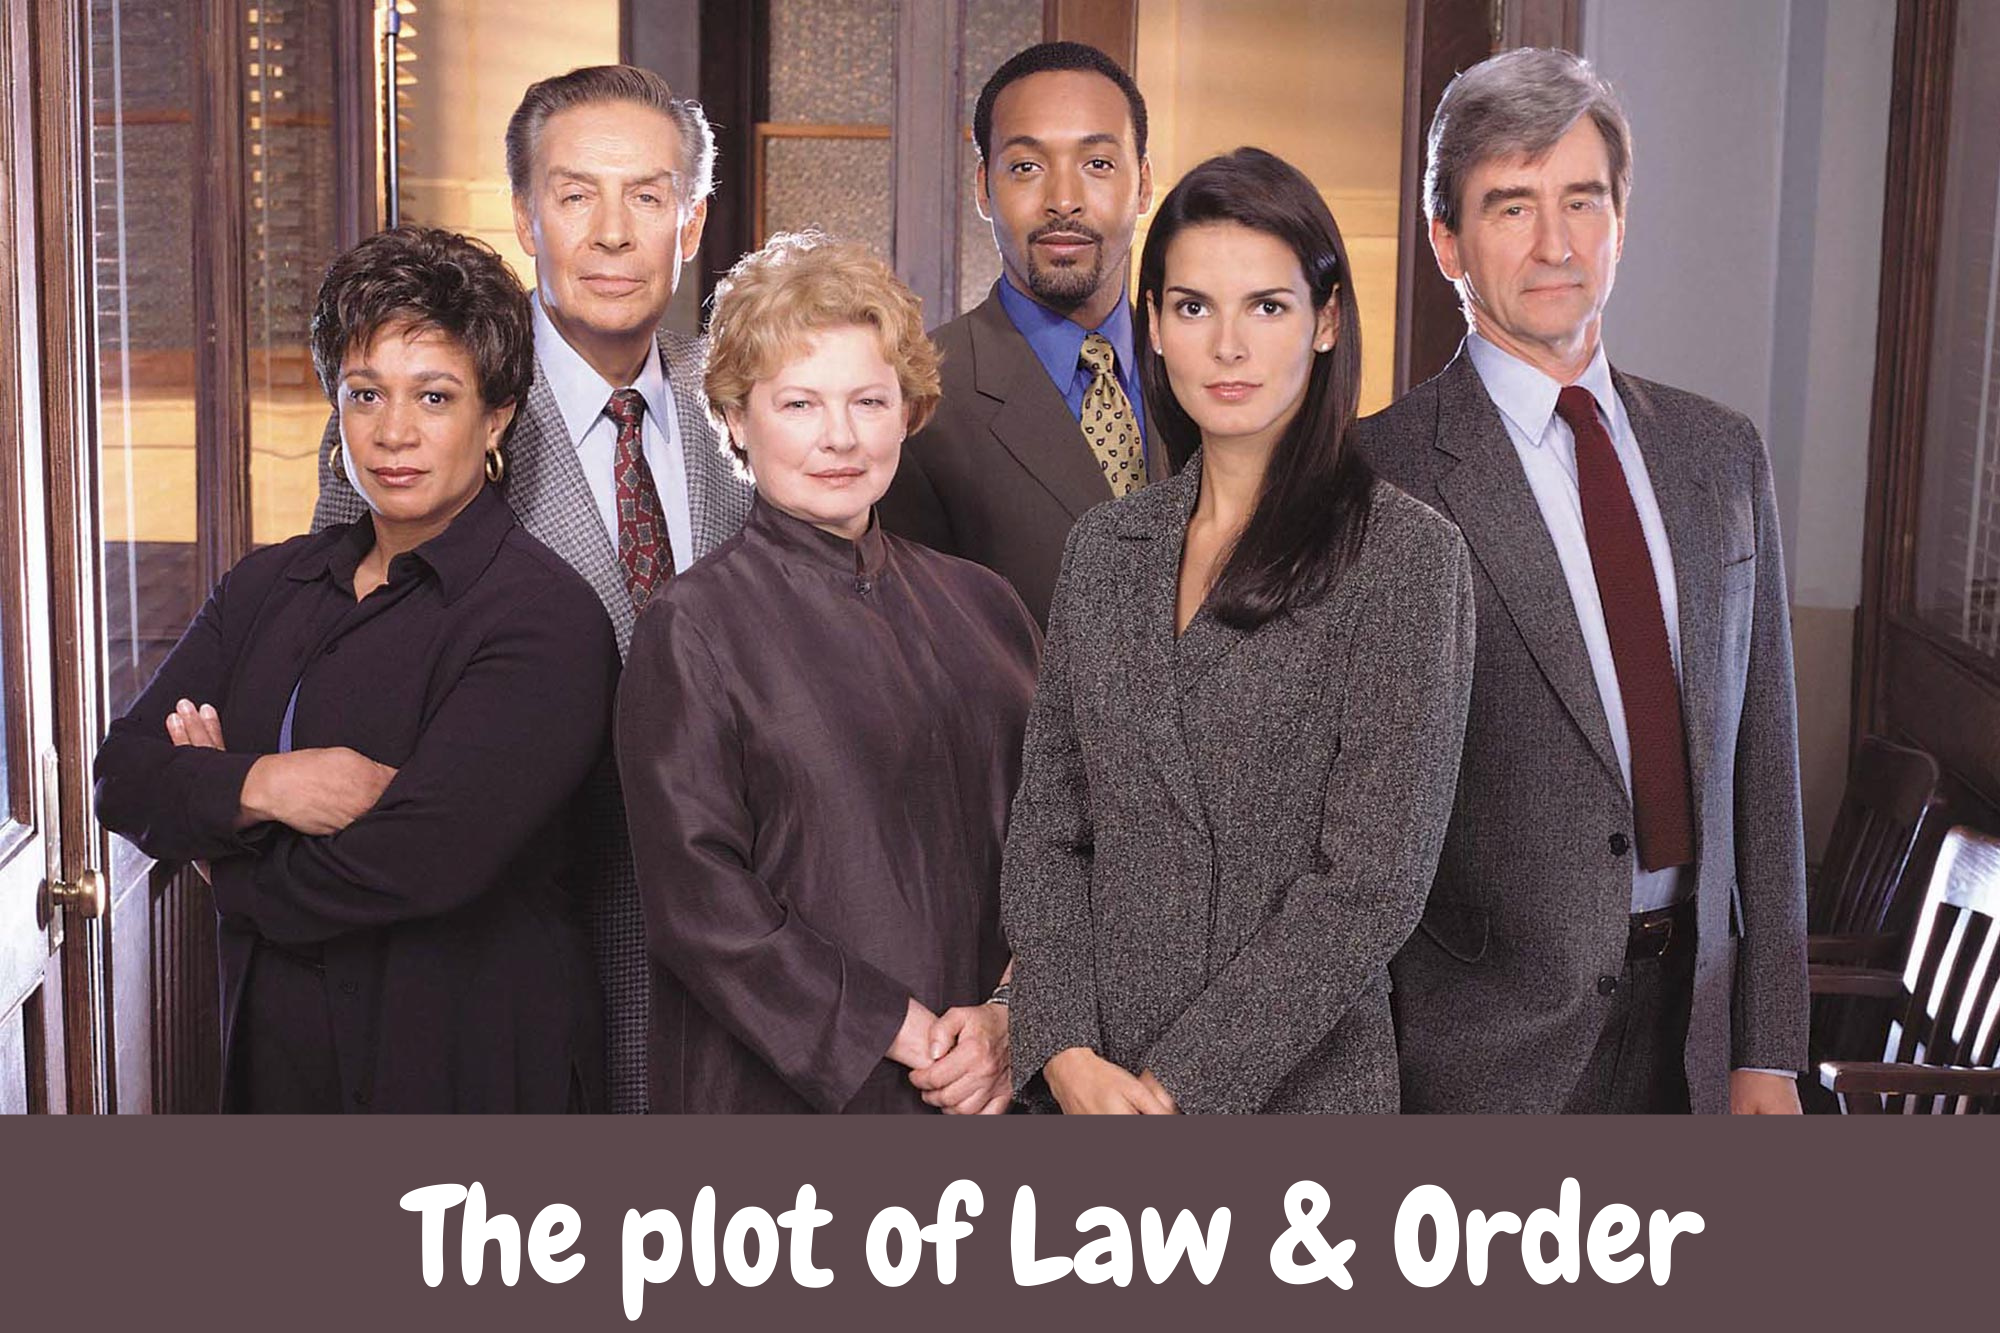 The plot of Law & Order